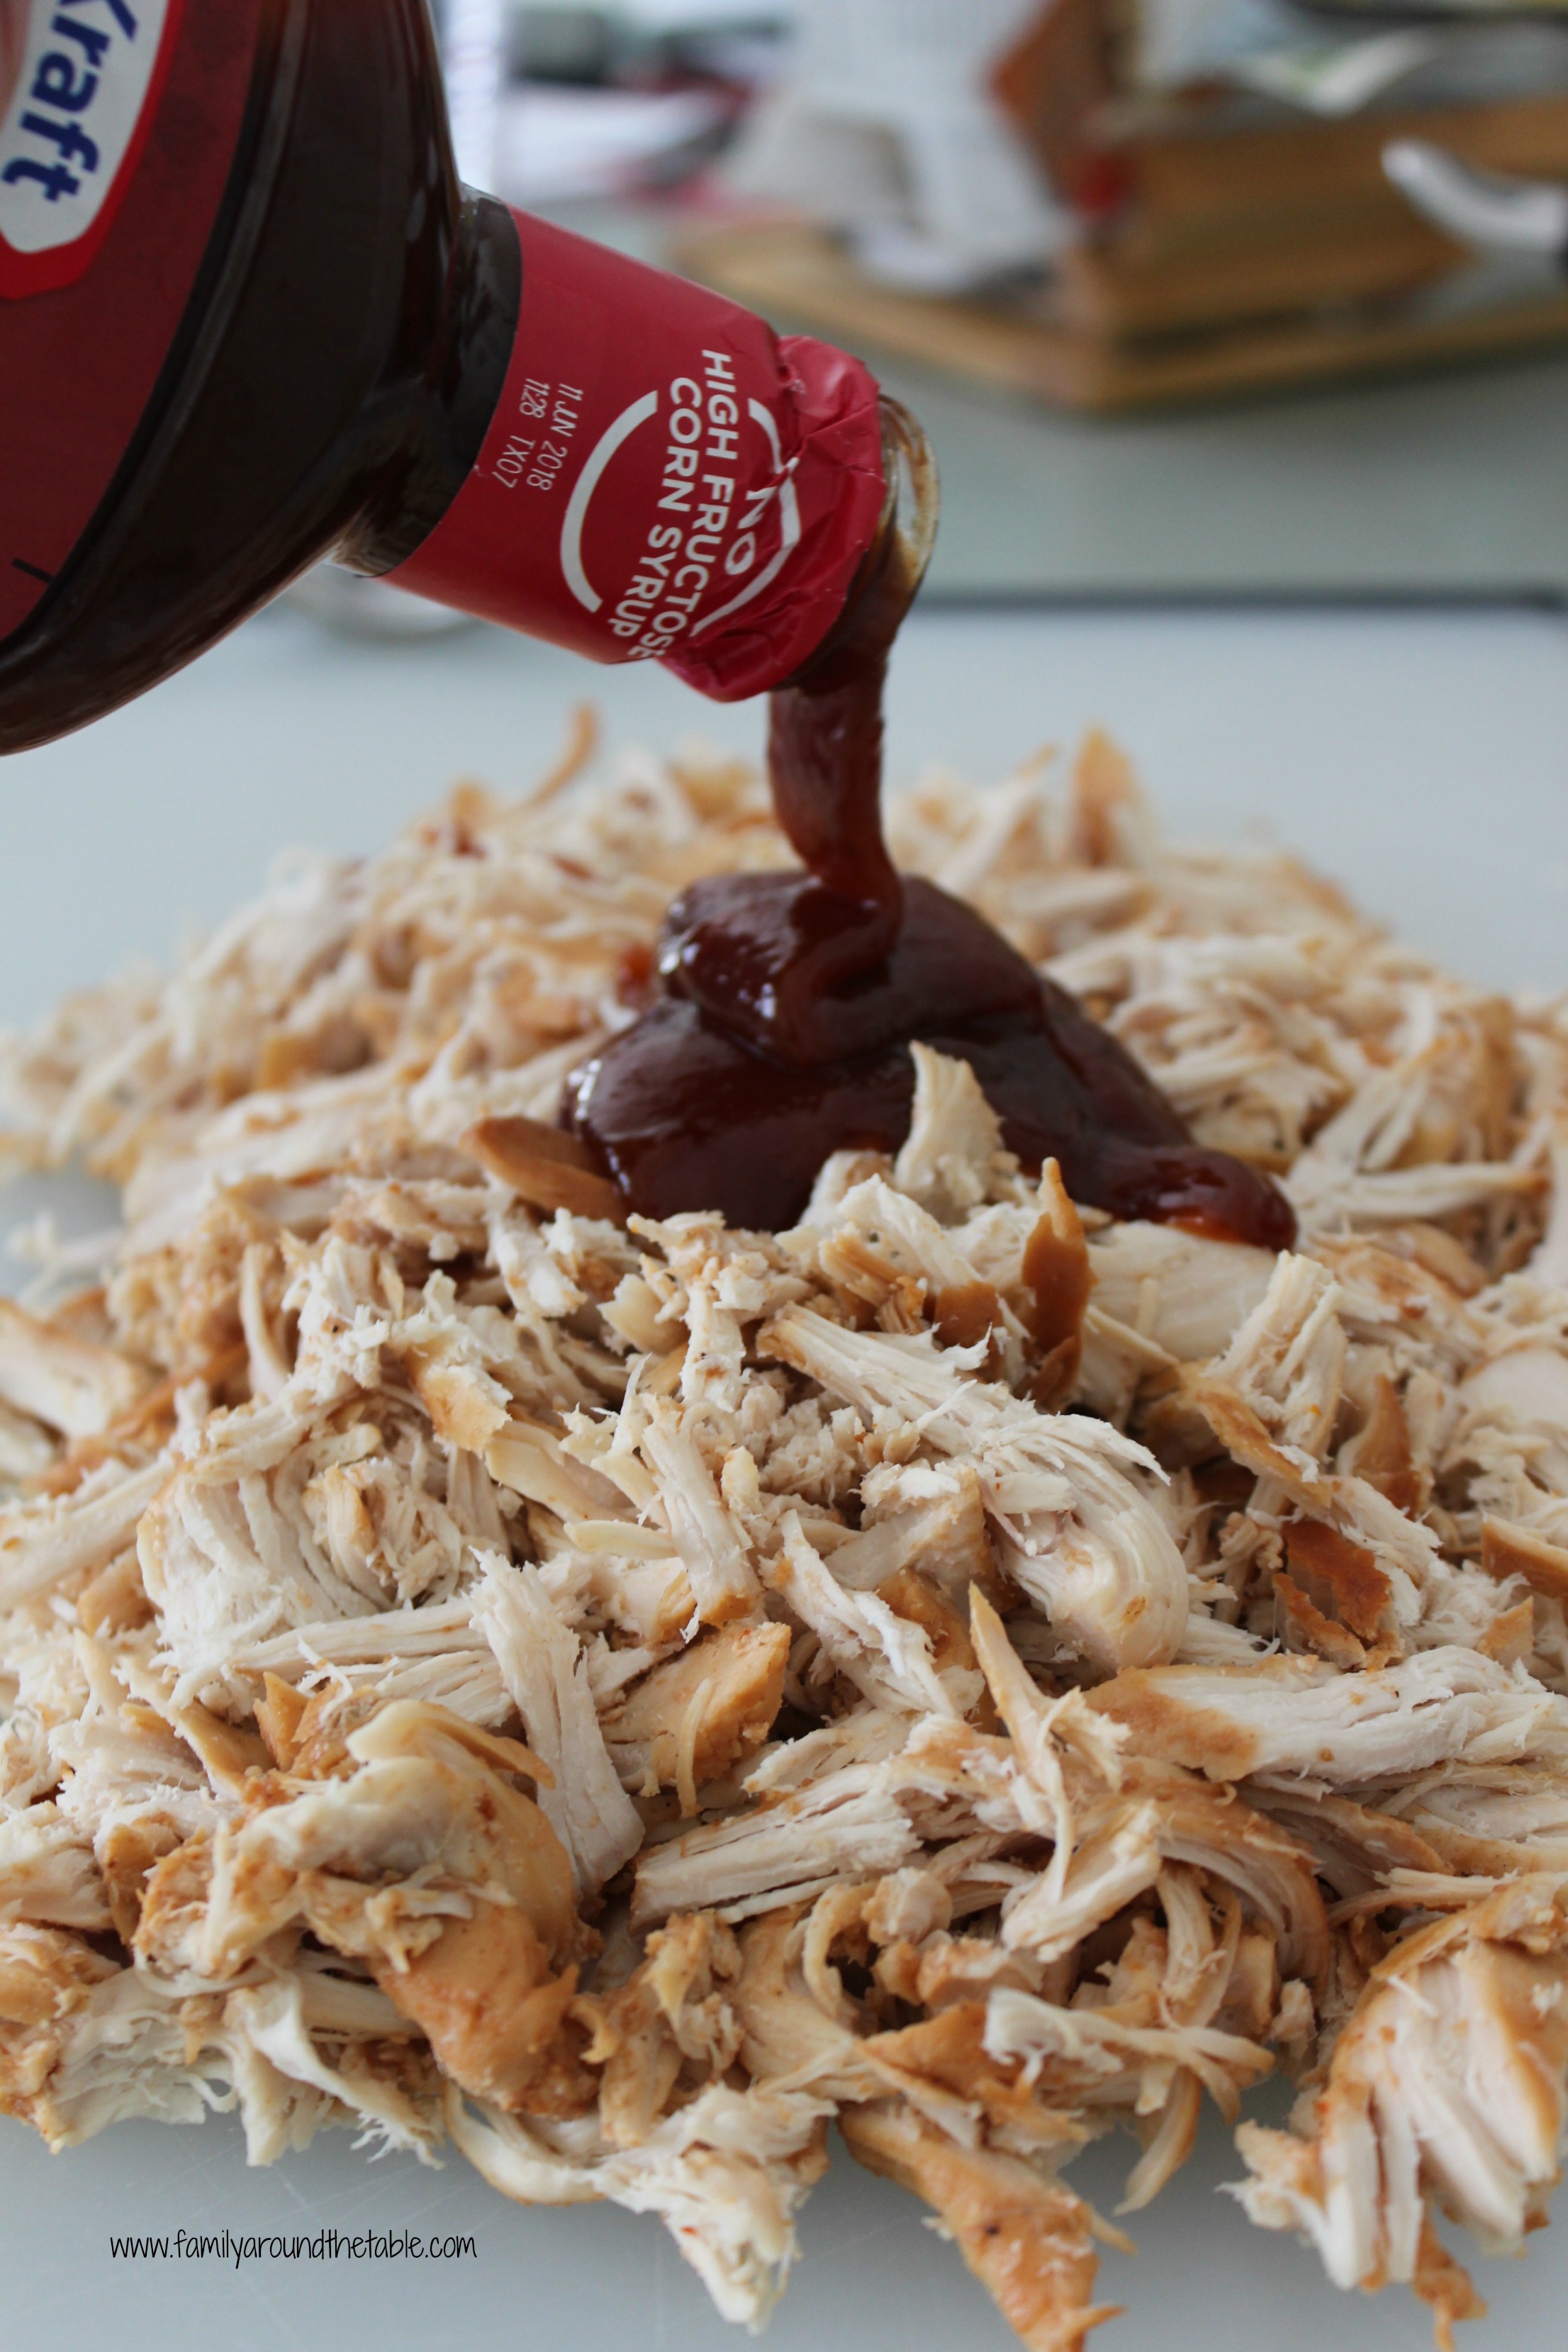 Pulled chicken made with the convenience of a slow cooker.